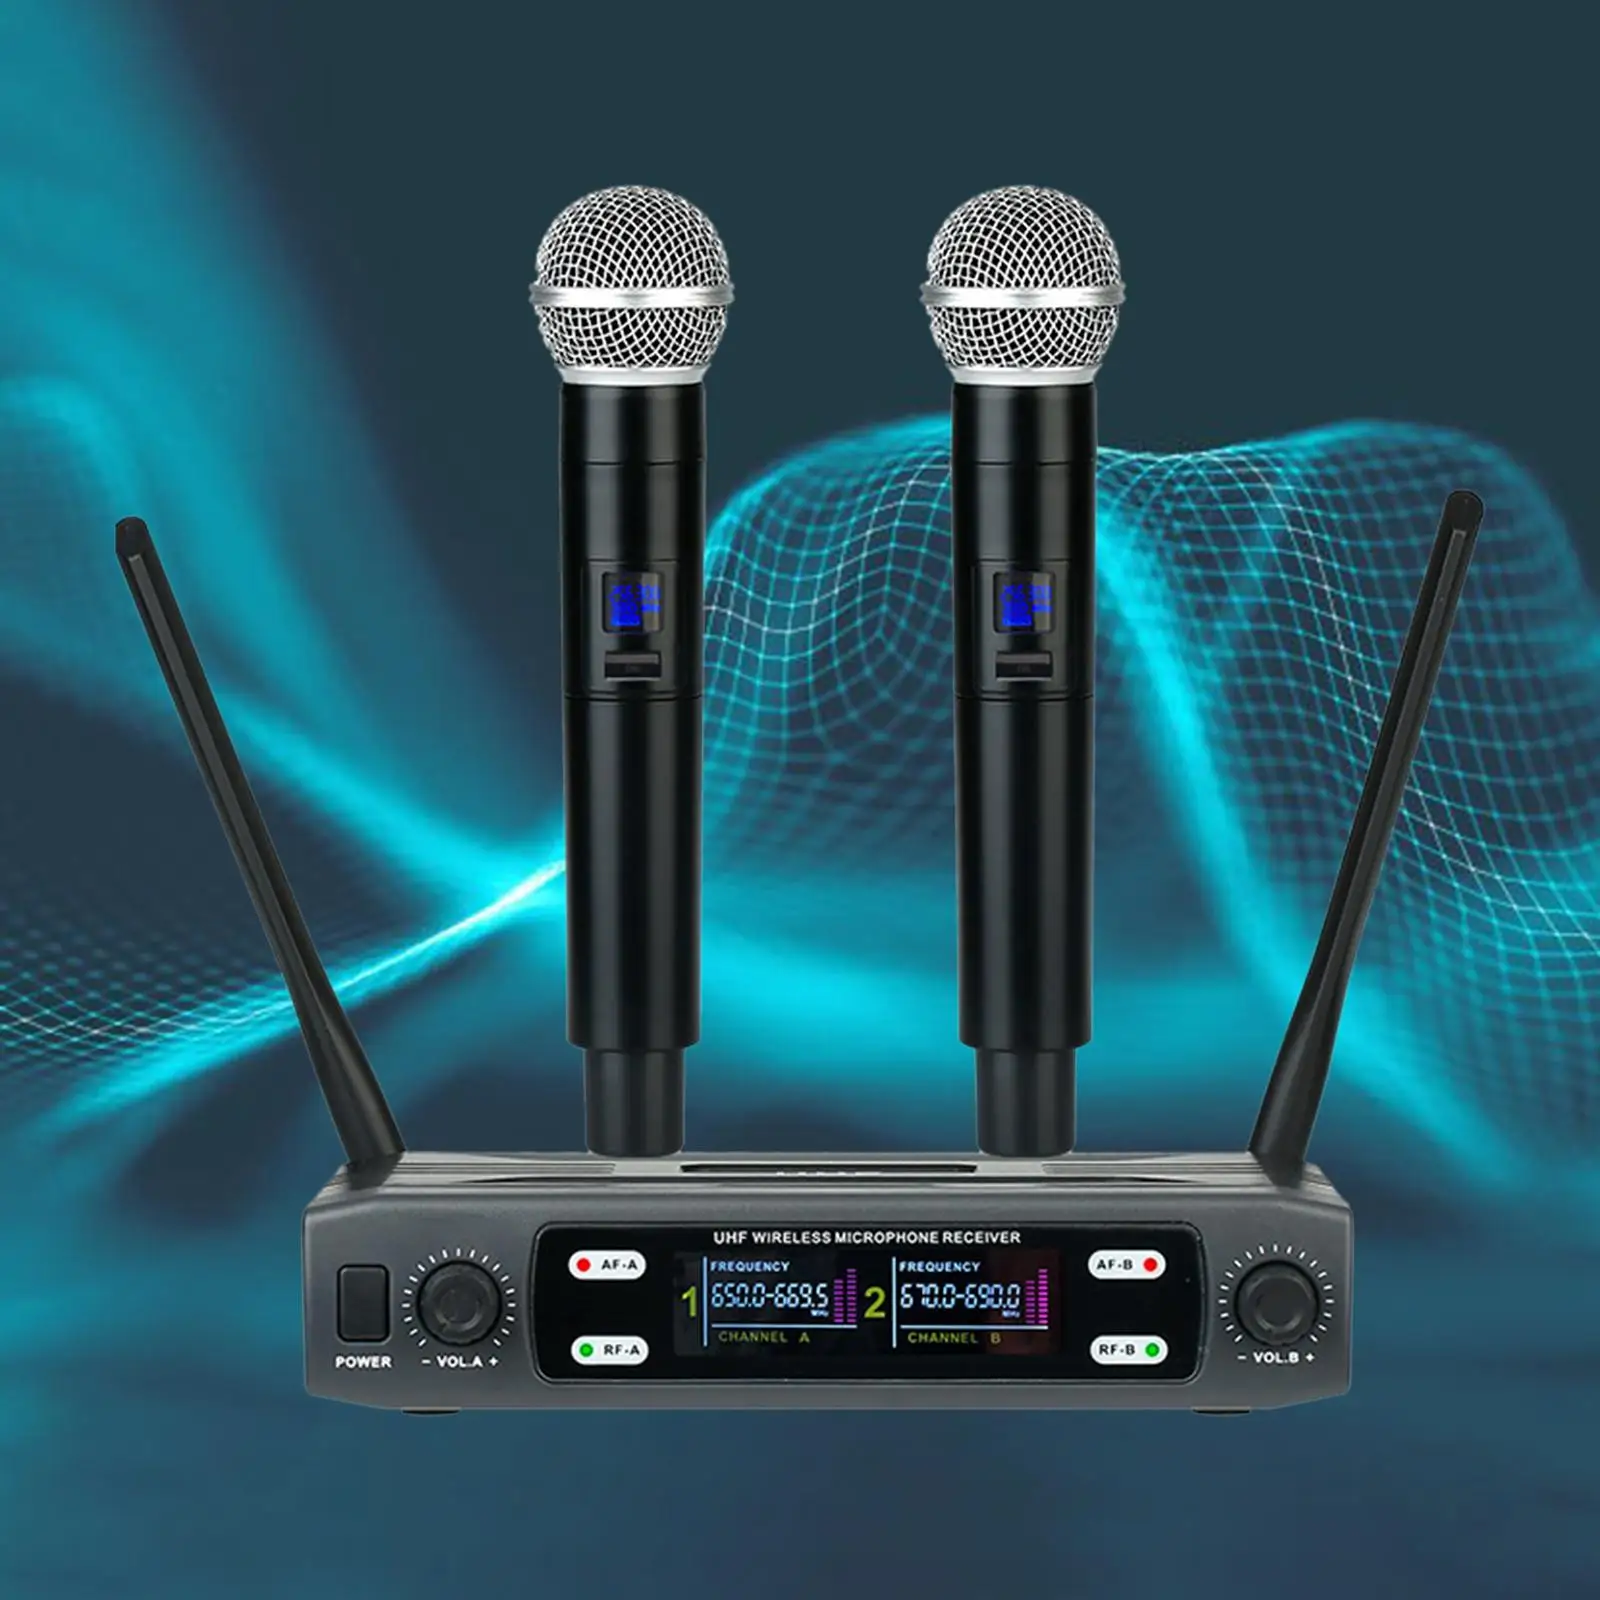 Dual Wireless Microphone System High Performance Premium Dual Wireless Mic Professional for Speech DJ Performance Stage Meeting